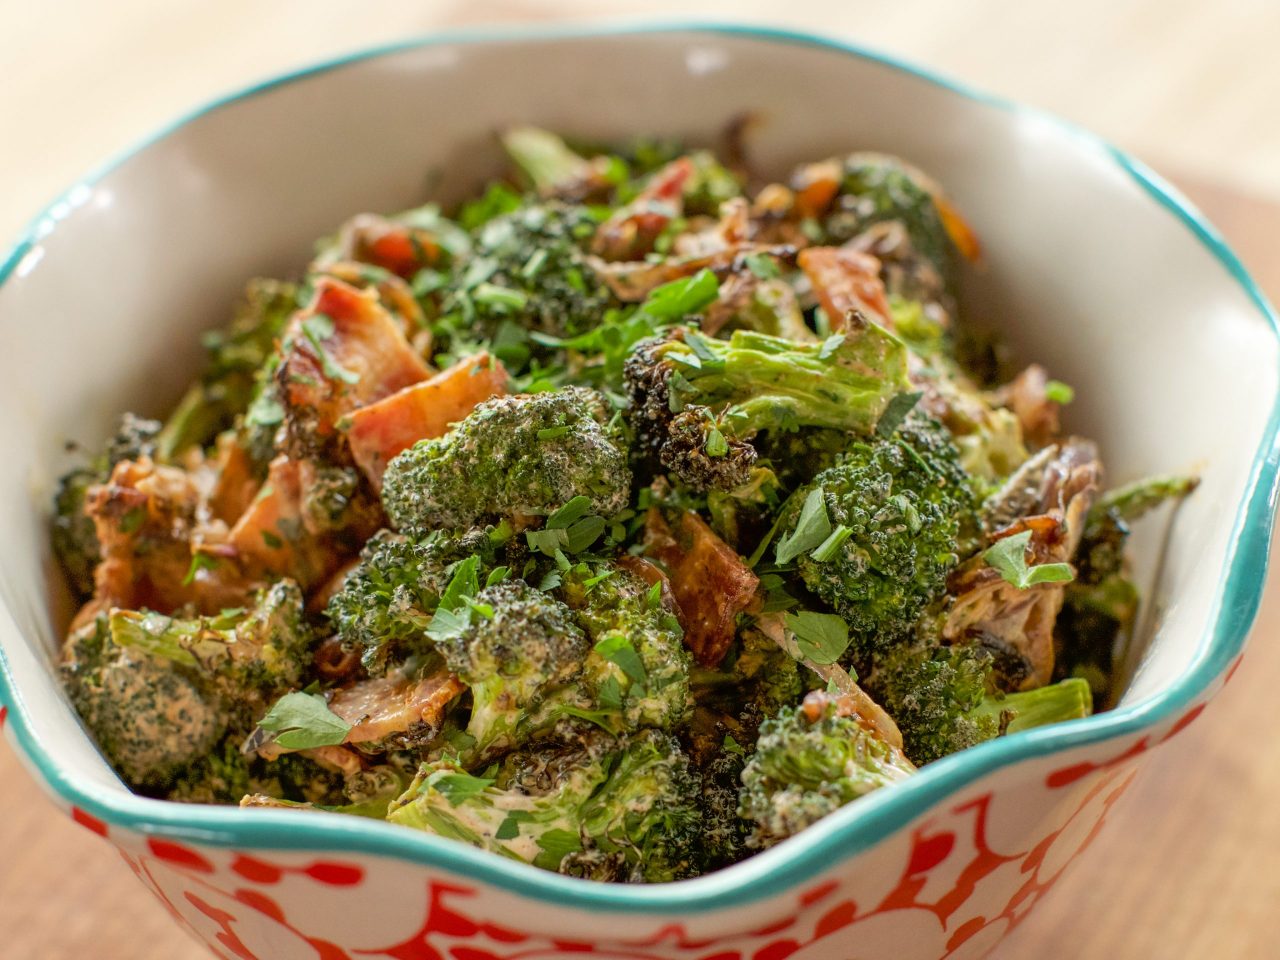 Ree Drummond's Roasted Broccoli Salad, as seen on The Pioneer Woman.